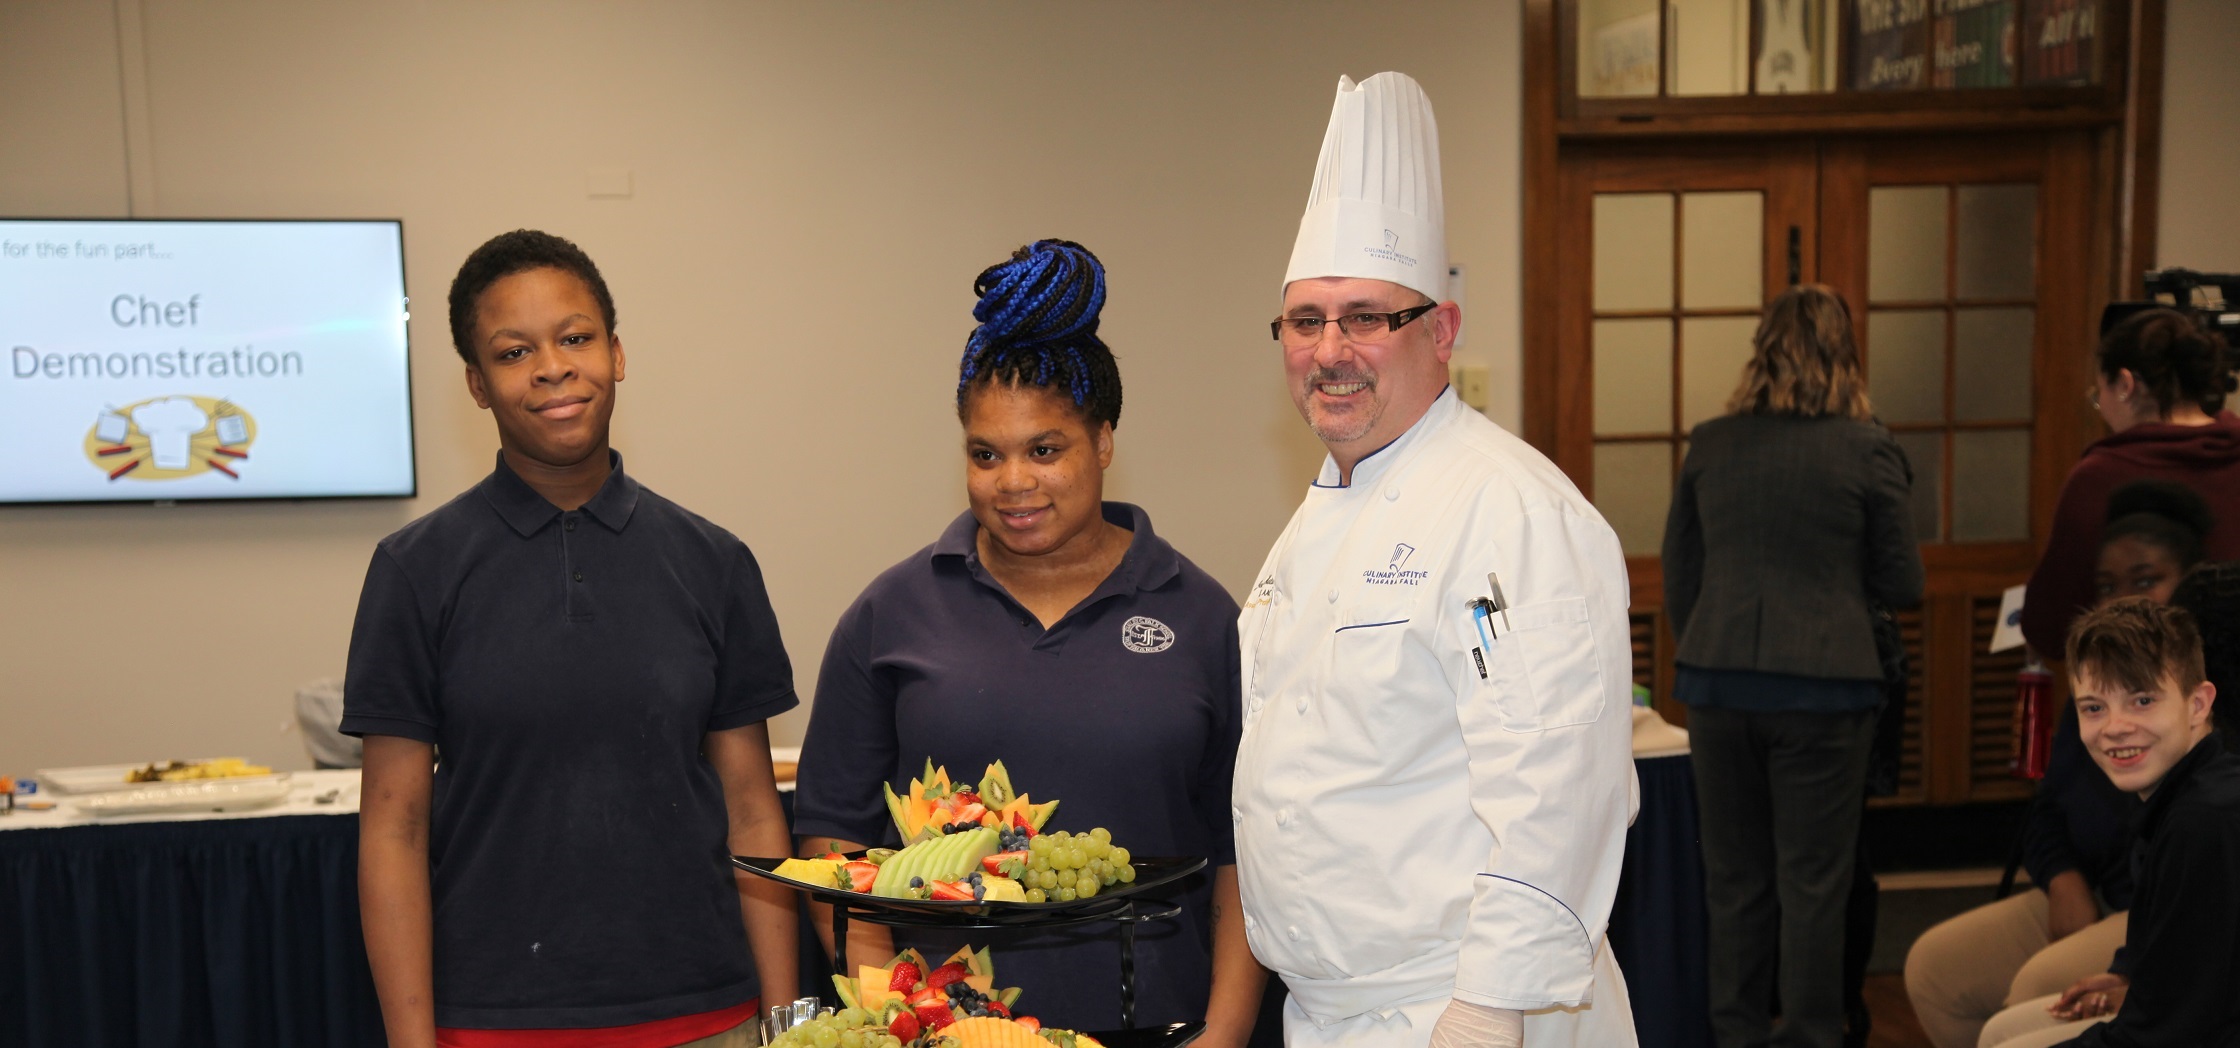 A male student, female student, and chef stand behind a display of fruit while smiling at the camera.